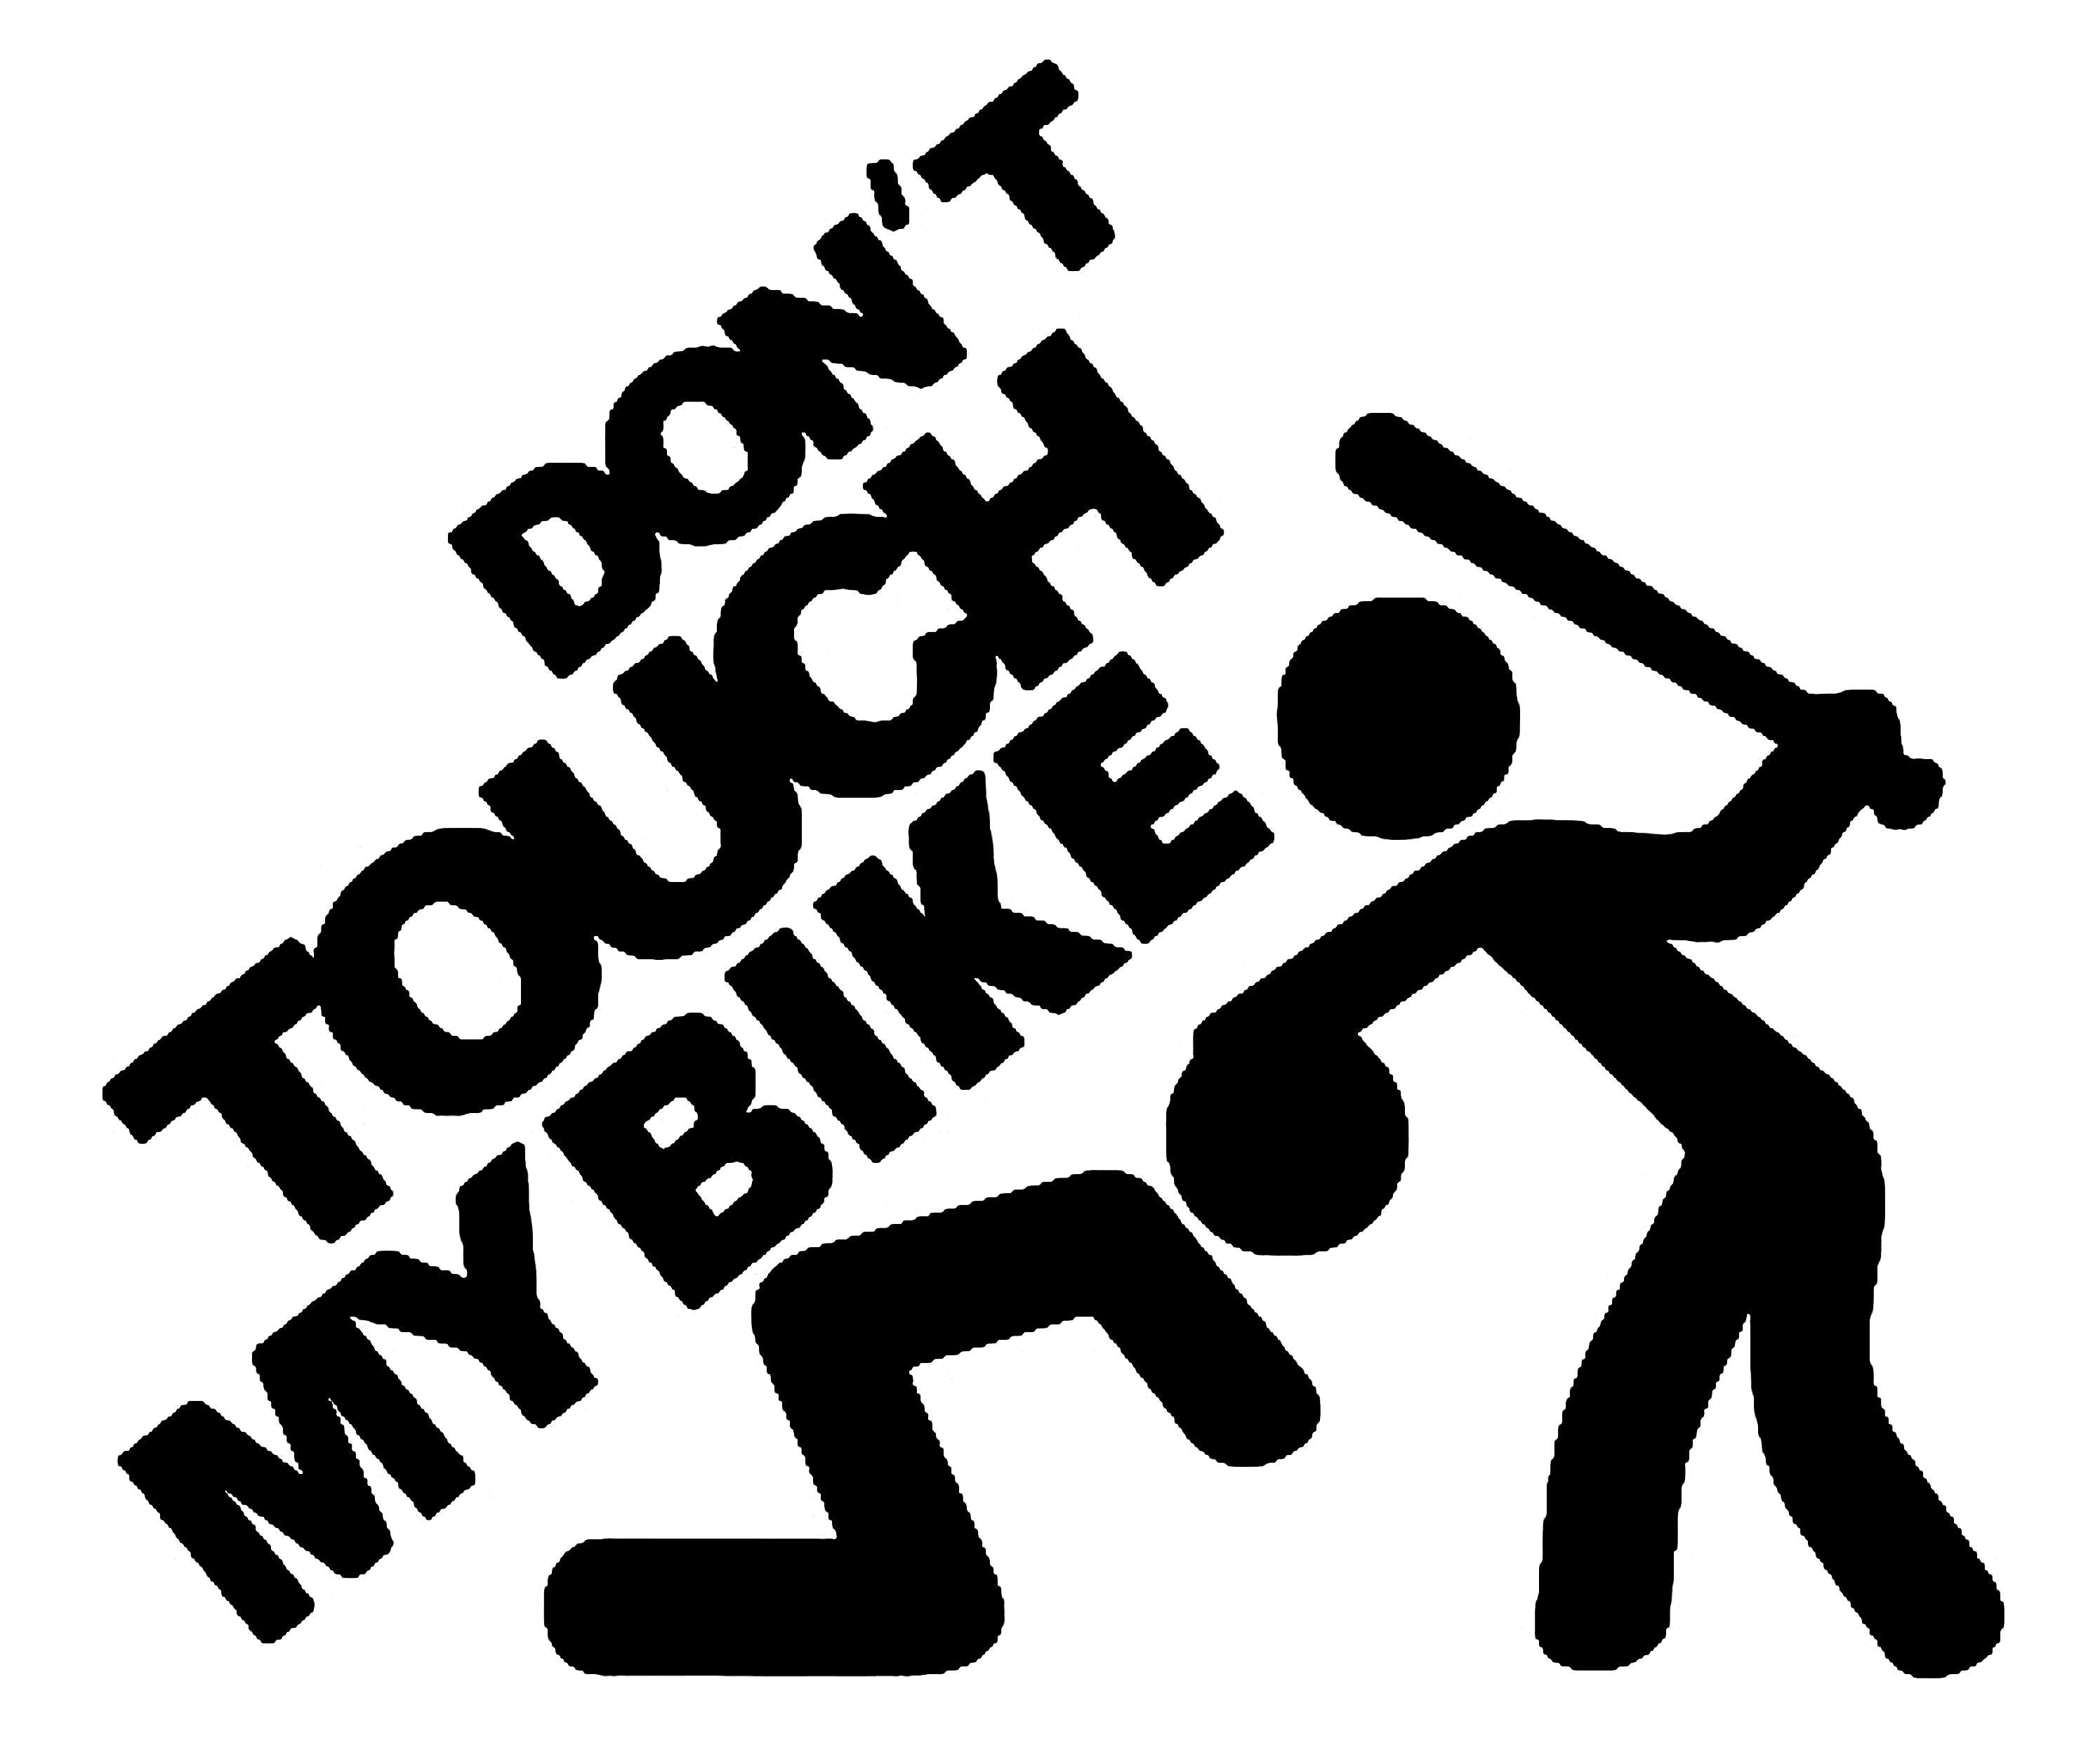 Rule 1: Don't touch my bike!